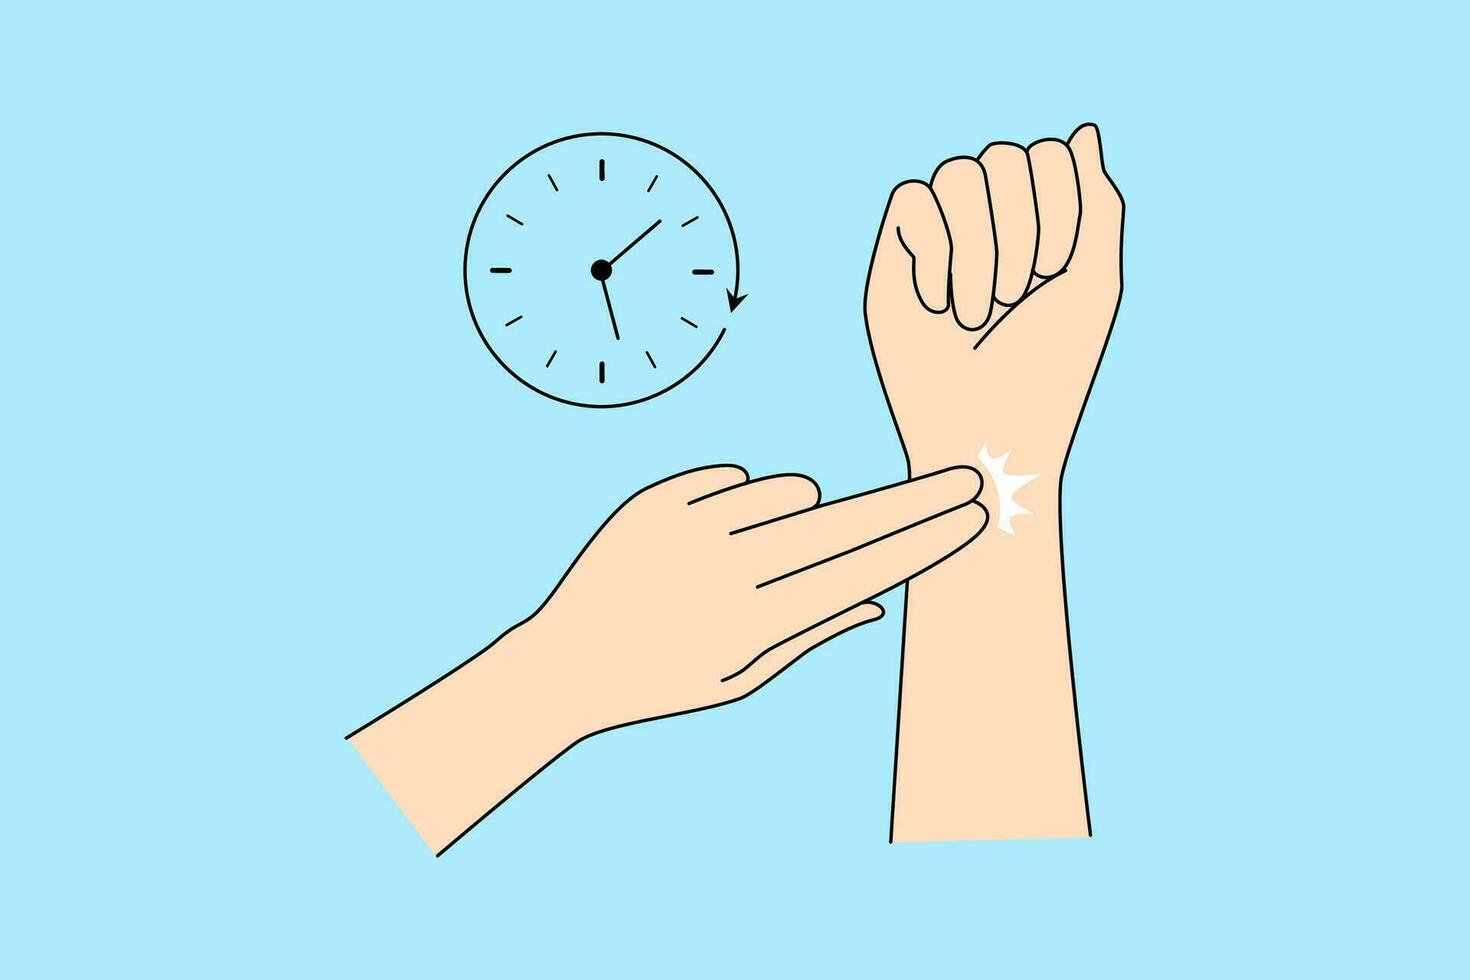 Close up of person check pulse with two fingers technique on wrist. Unhealthy man or woman measure radial pulse on hand. Medicine and healthcare concept. Vector illustration.